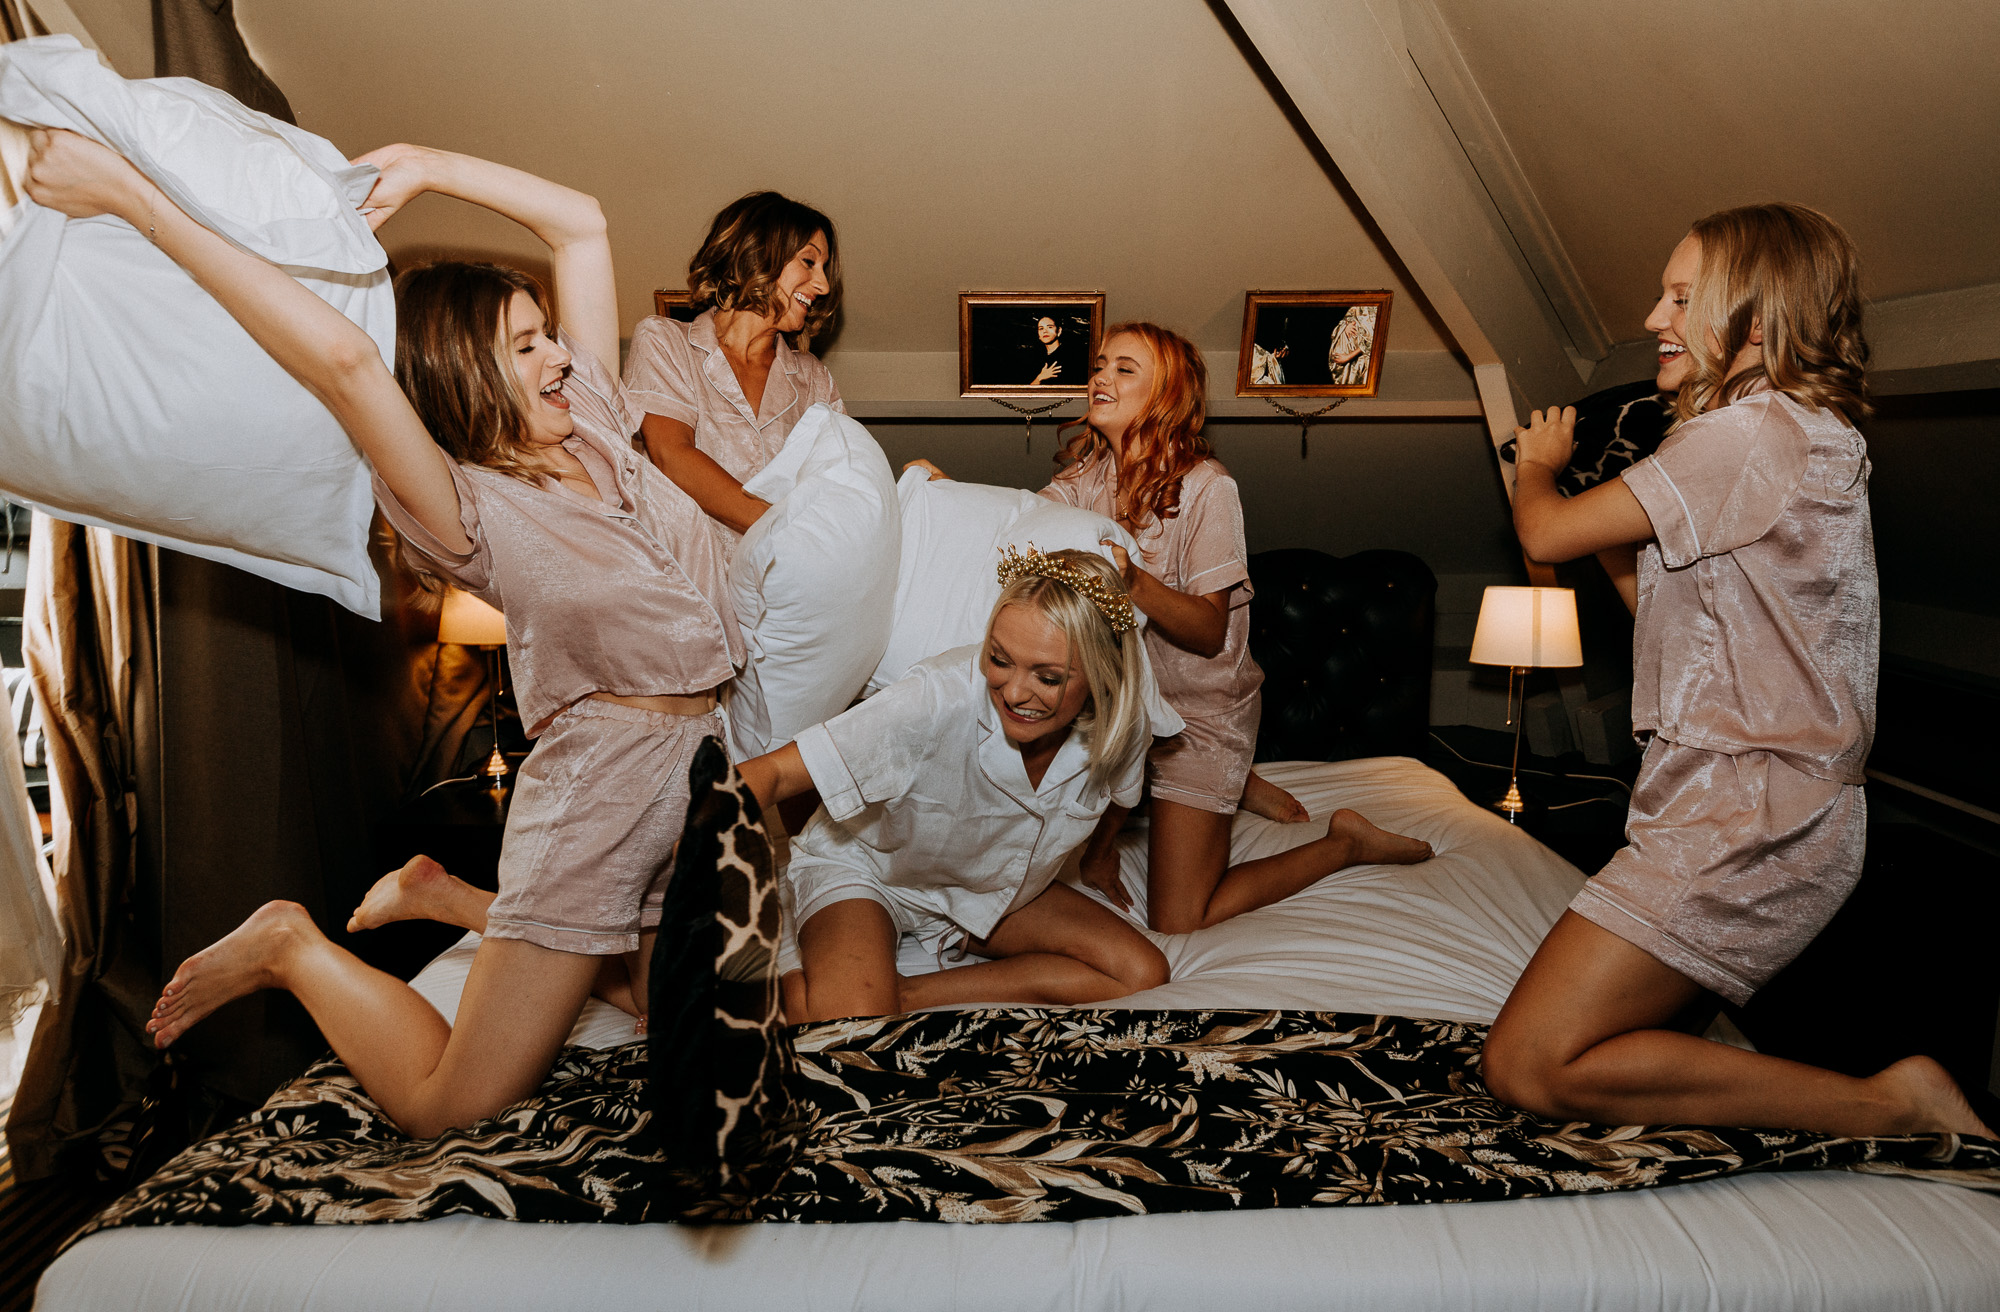 pillow fight between the bride and her bridesmaids